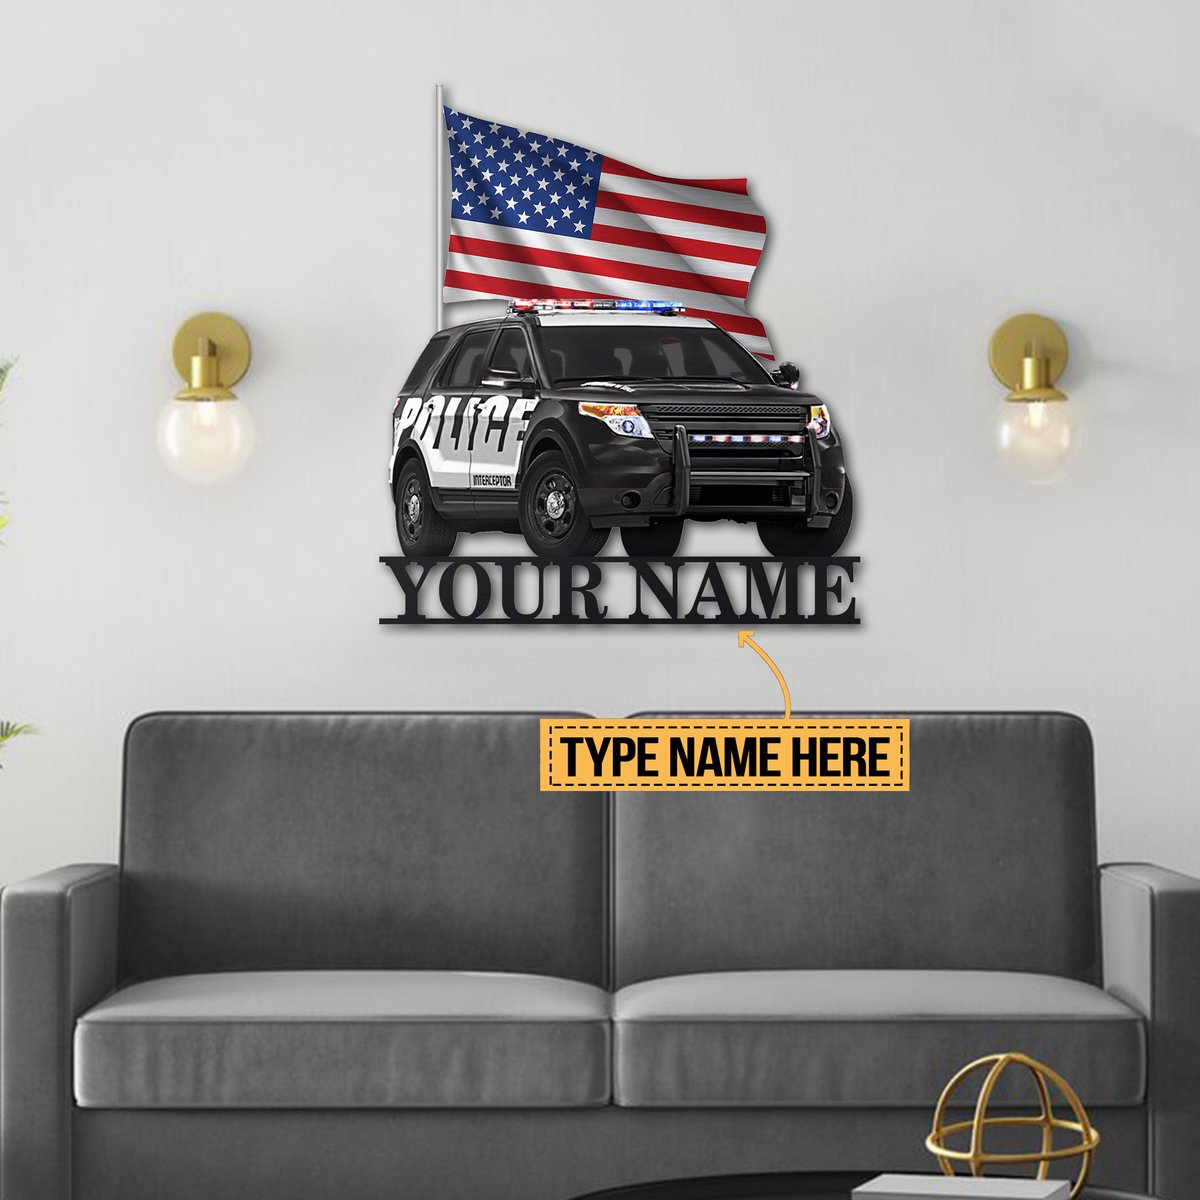 SUV Police American flag custom personalized metal sign 5